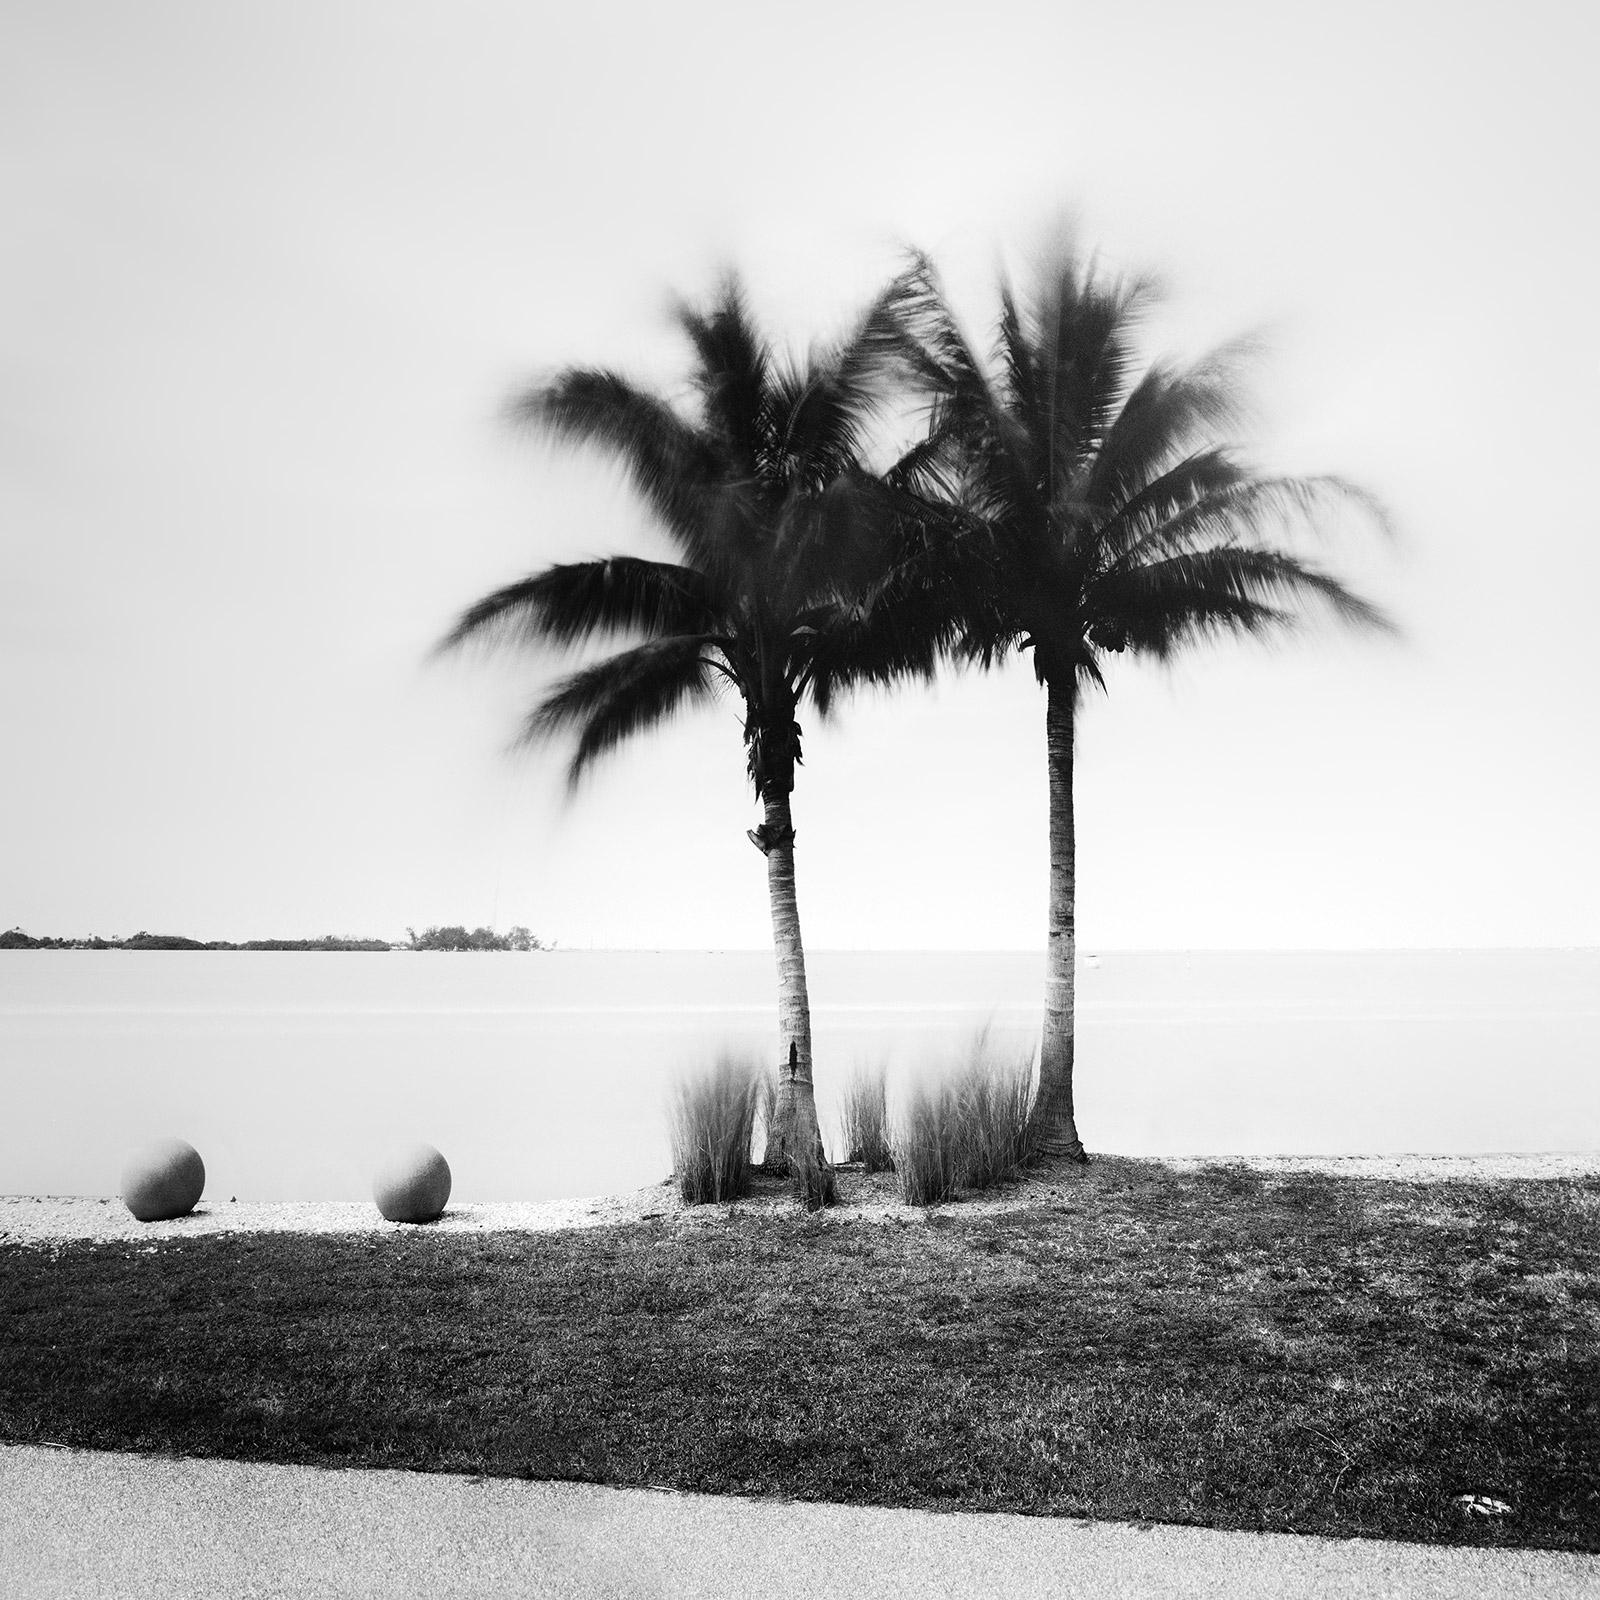 Gerald Berghammer Landscape Photograph - Palm Trees on Promenade, Florida, USA, black and white photography, landscape